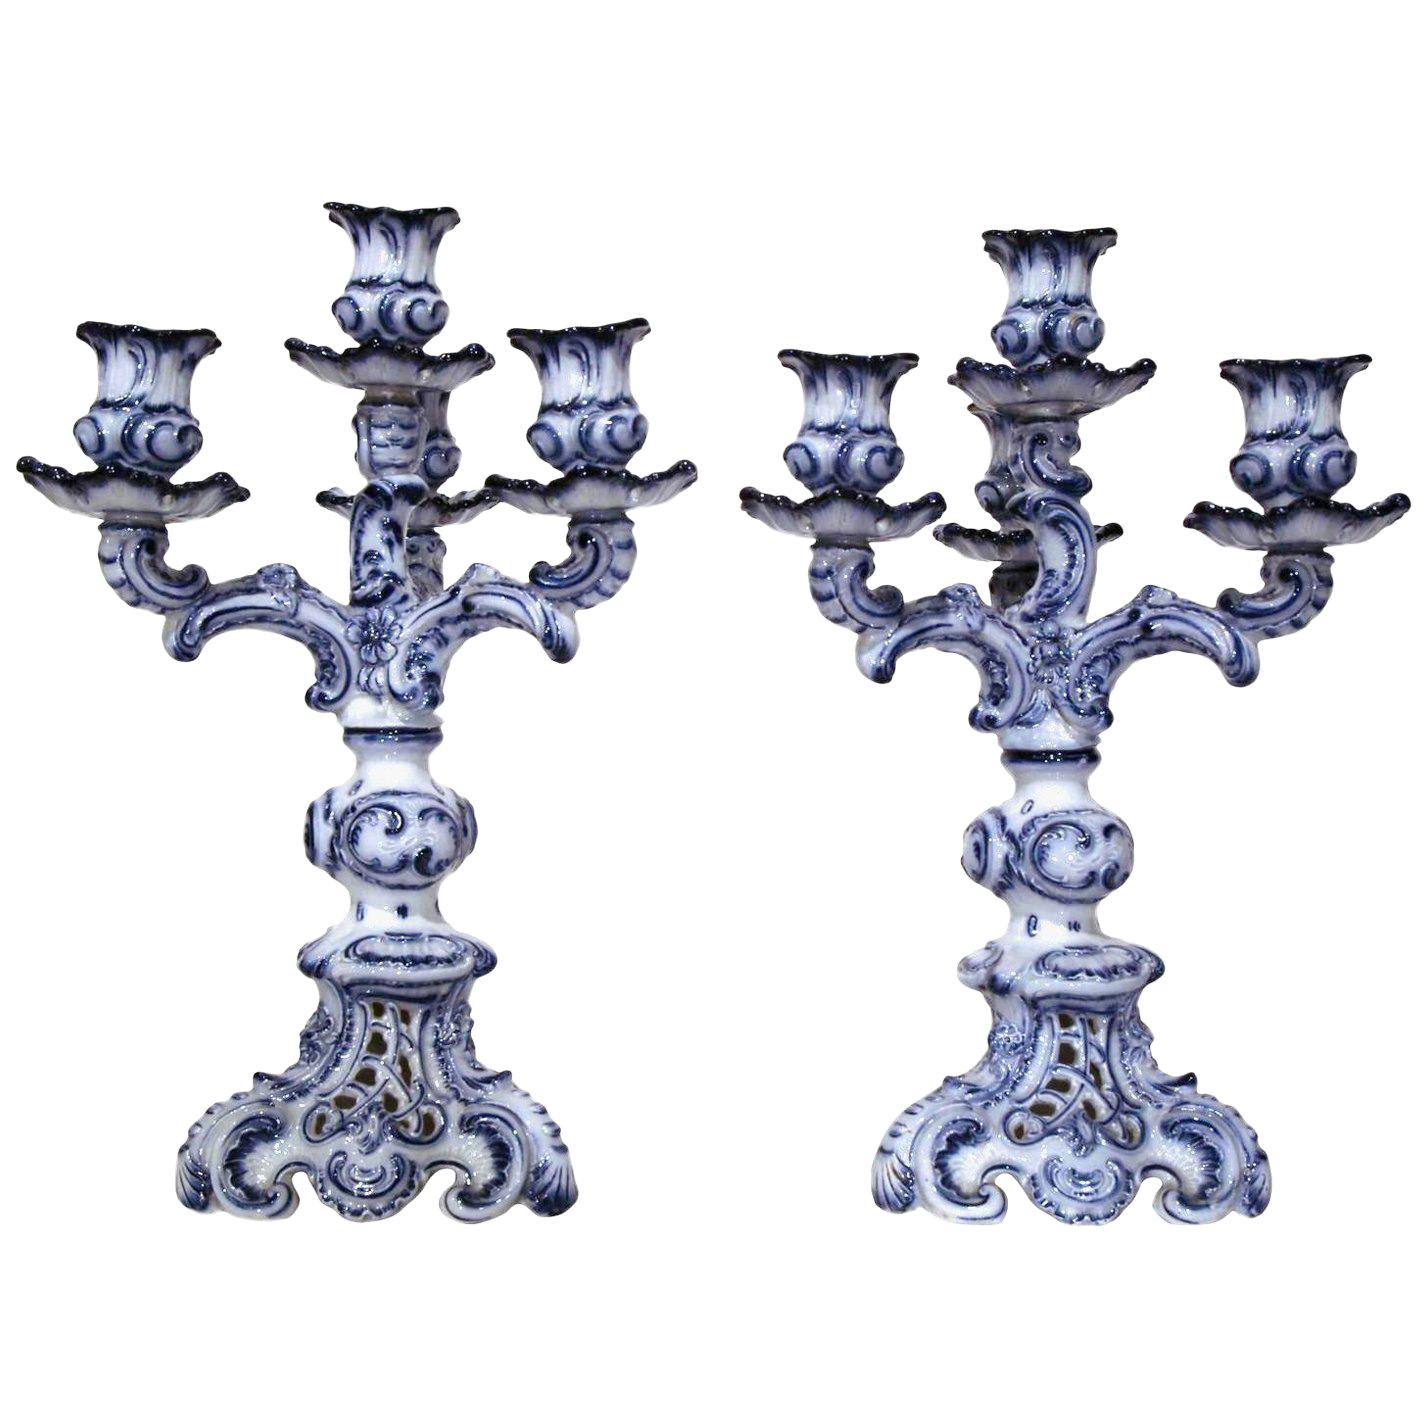 Pair of 19th Century French Blue and White Delft Style Four-Arm Candleholders